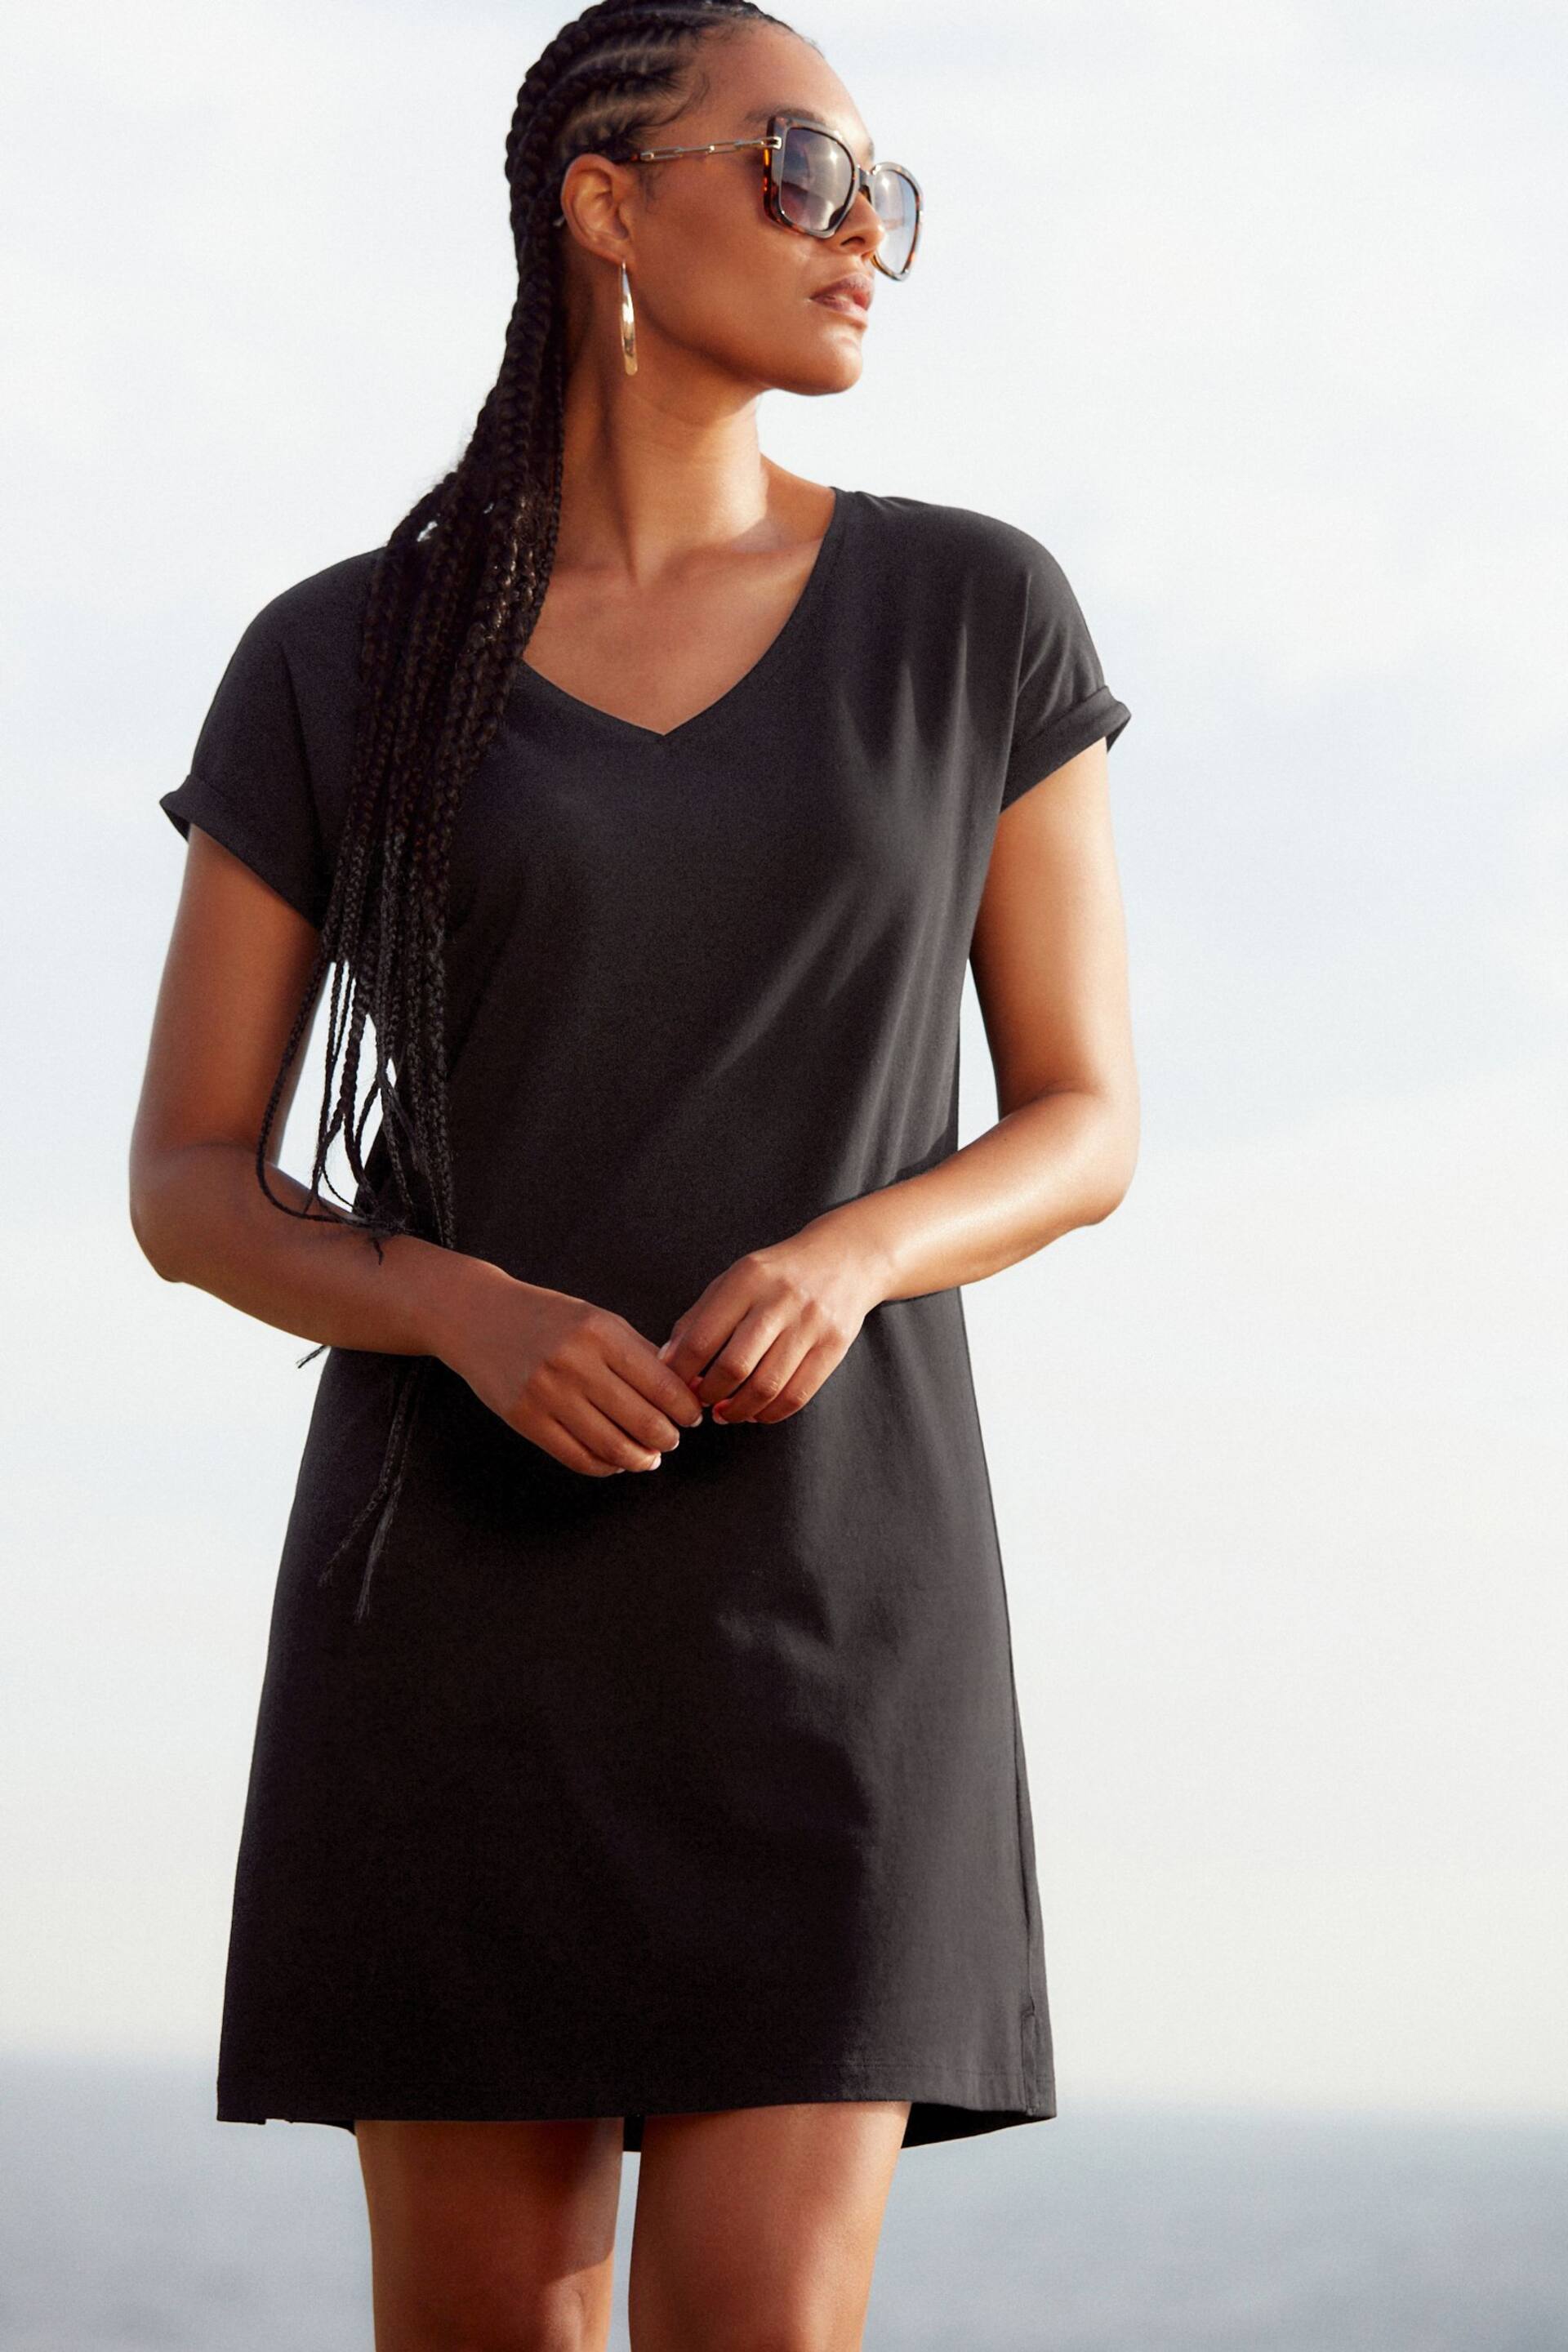 Black 100% Cotton Relaxed V-Neck Capped Sleeve Tunic Dress - Image 1 of 5